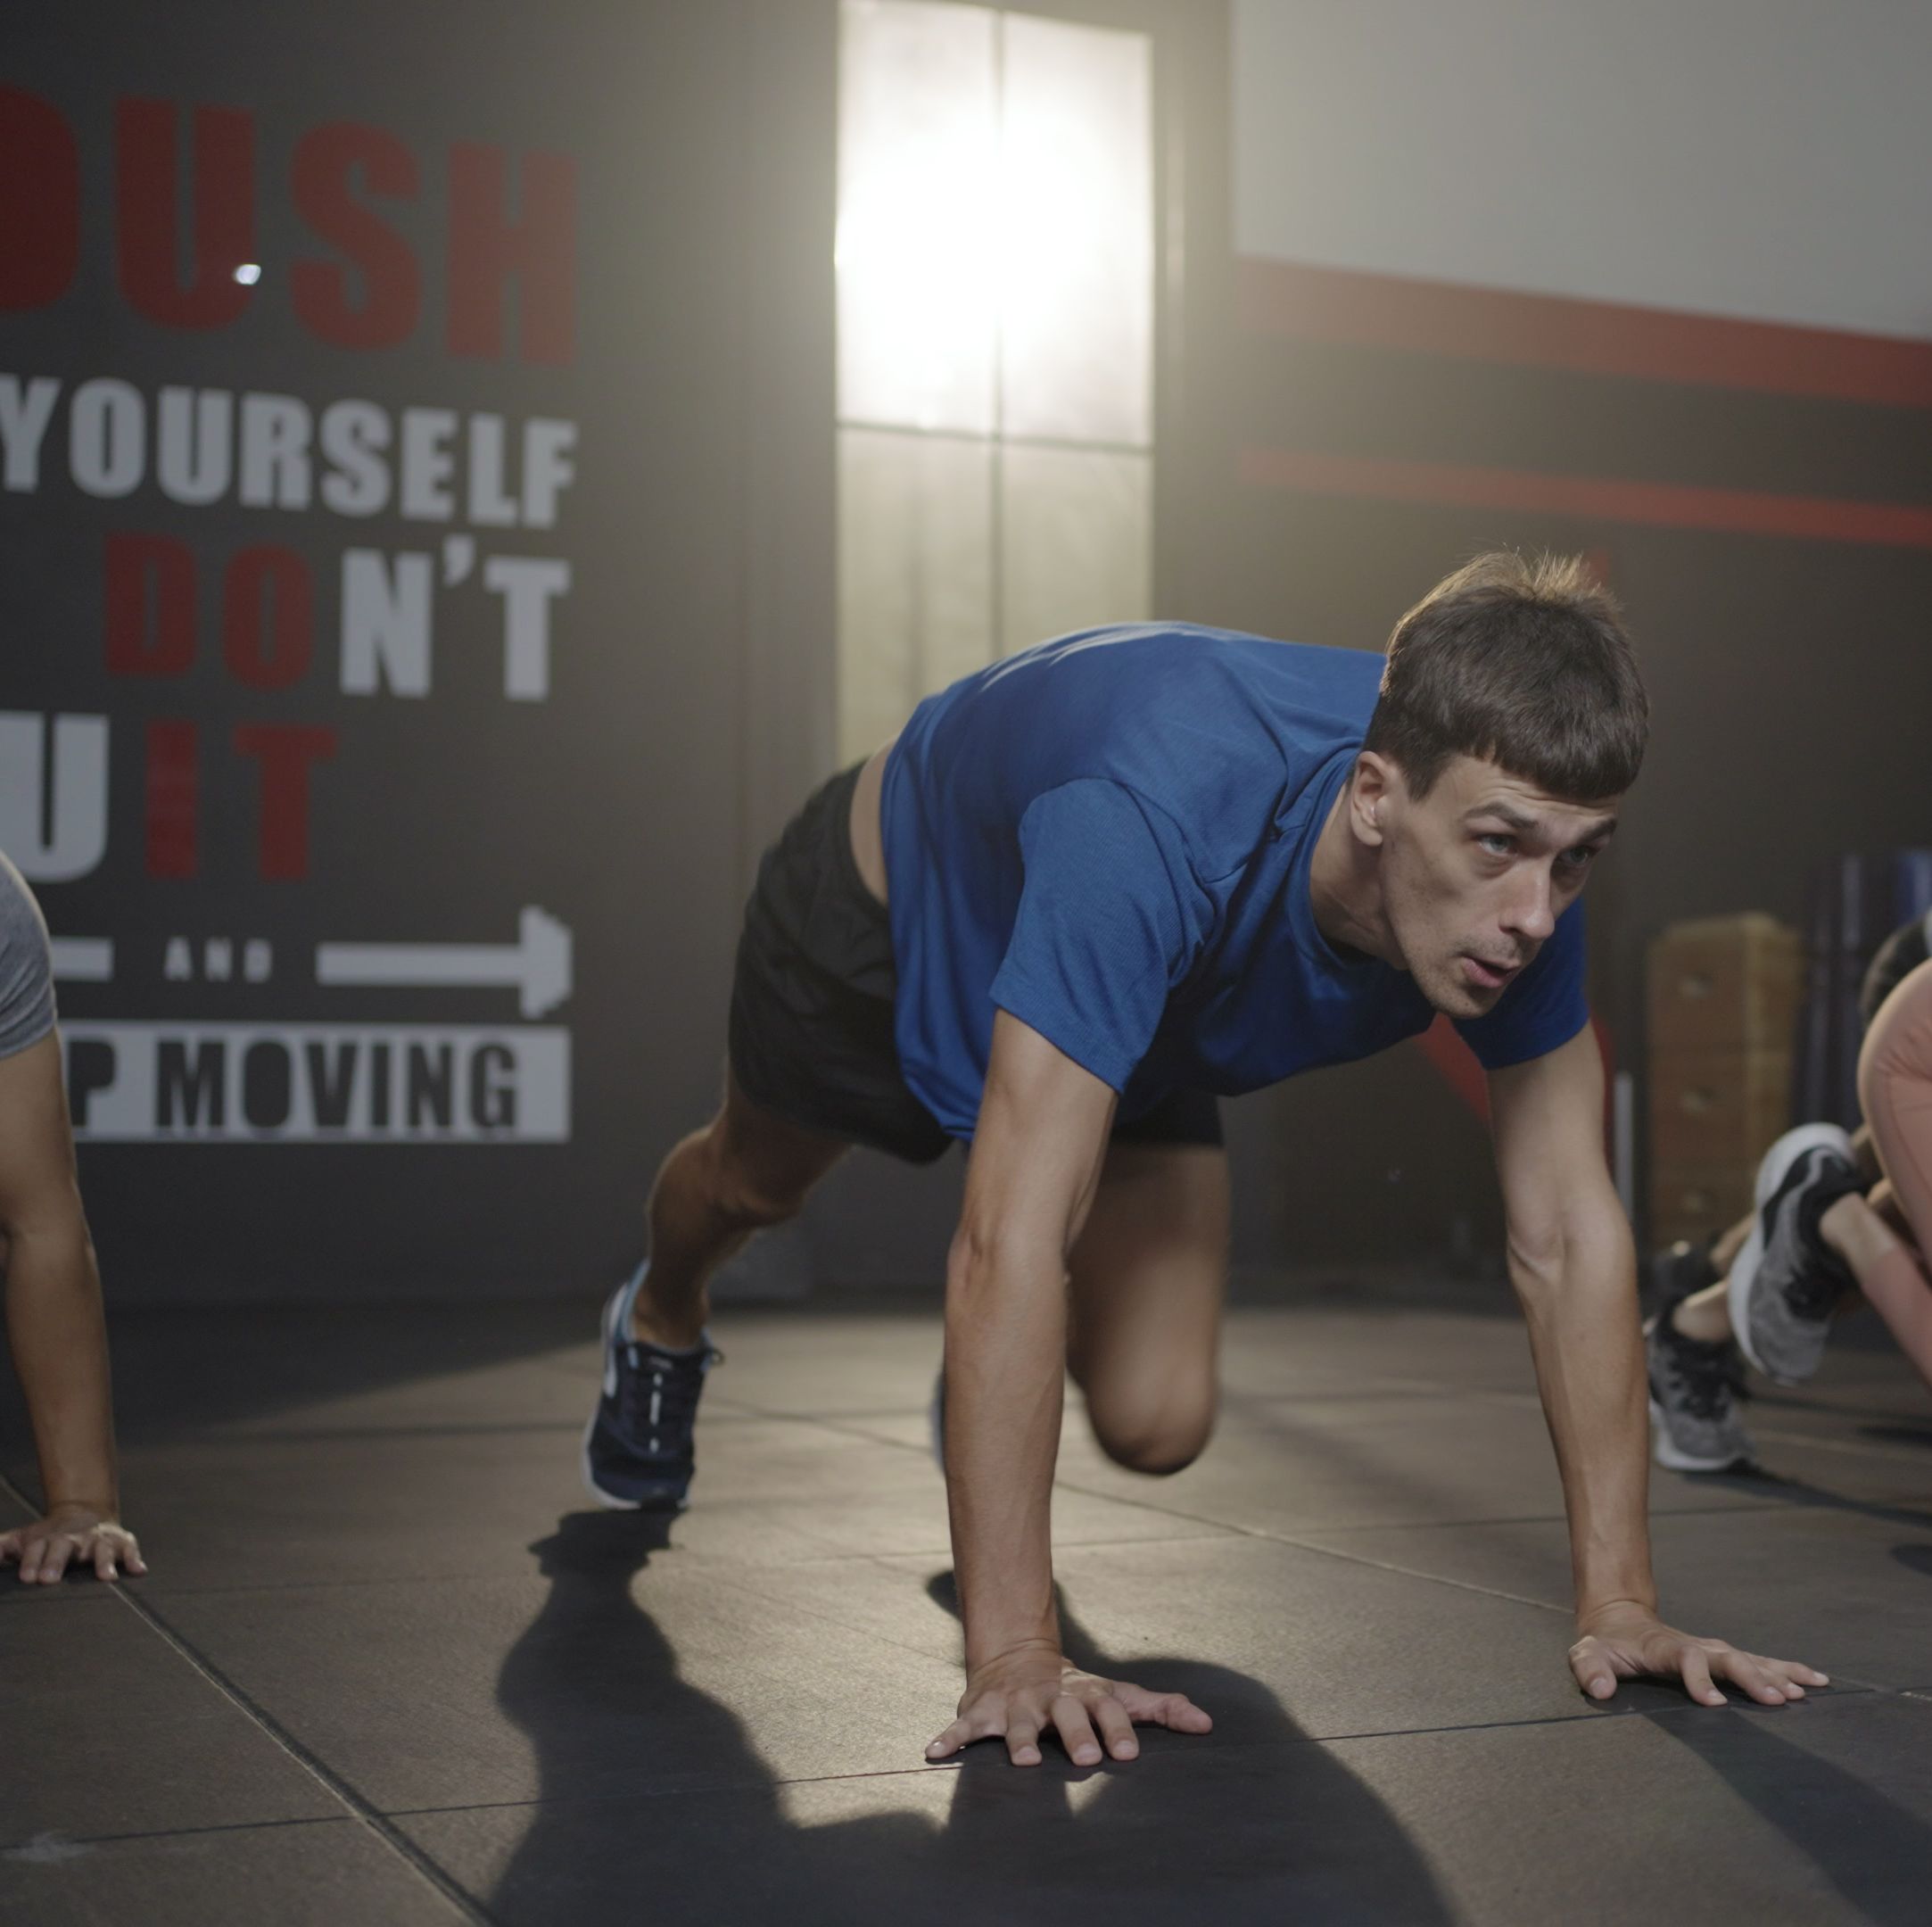 HIIT Workouts Are Overrated. Try These 3 Alternatives Instead.